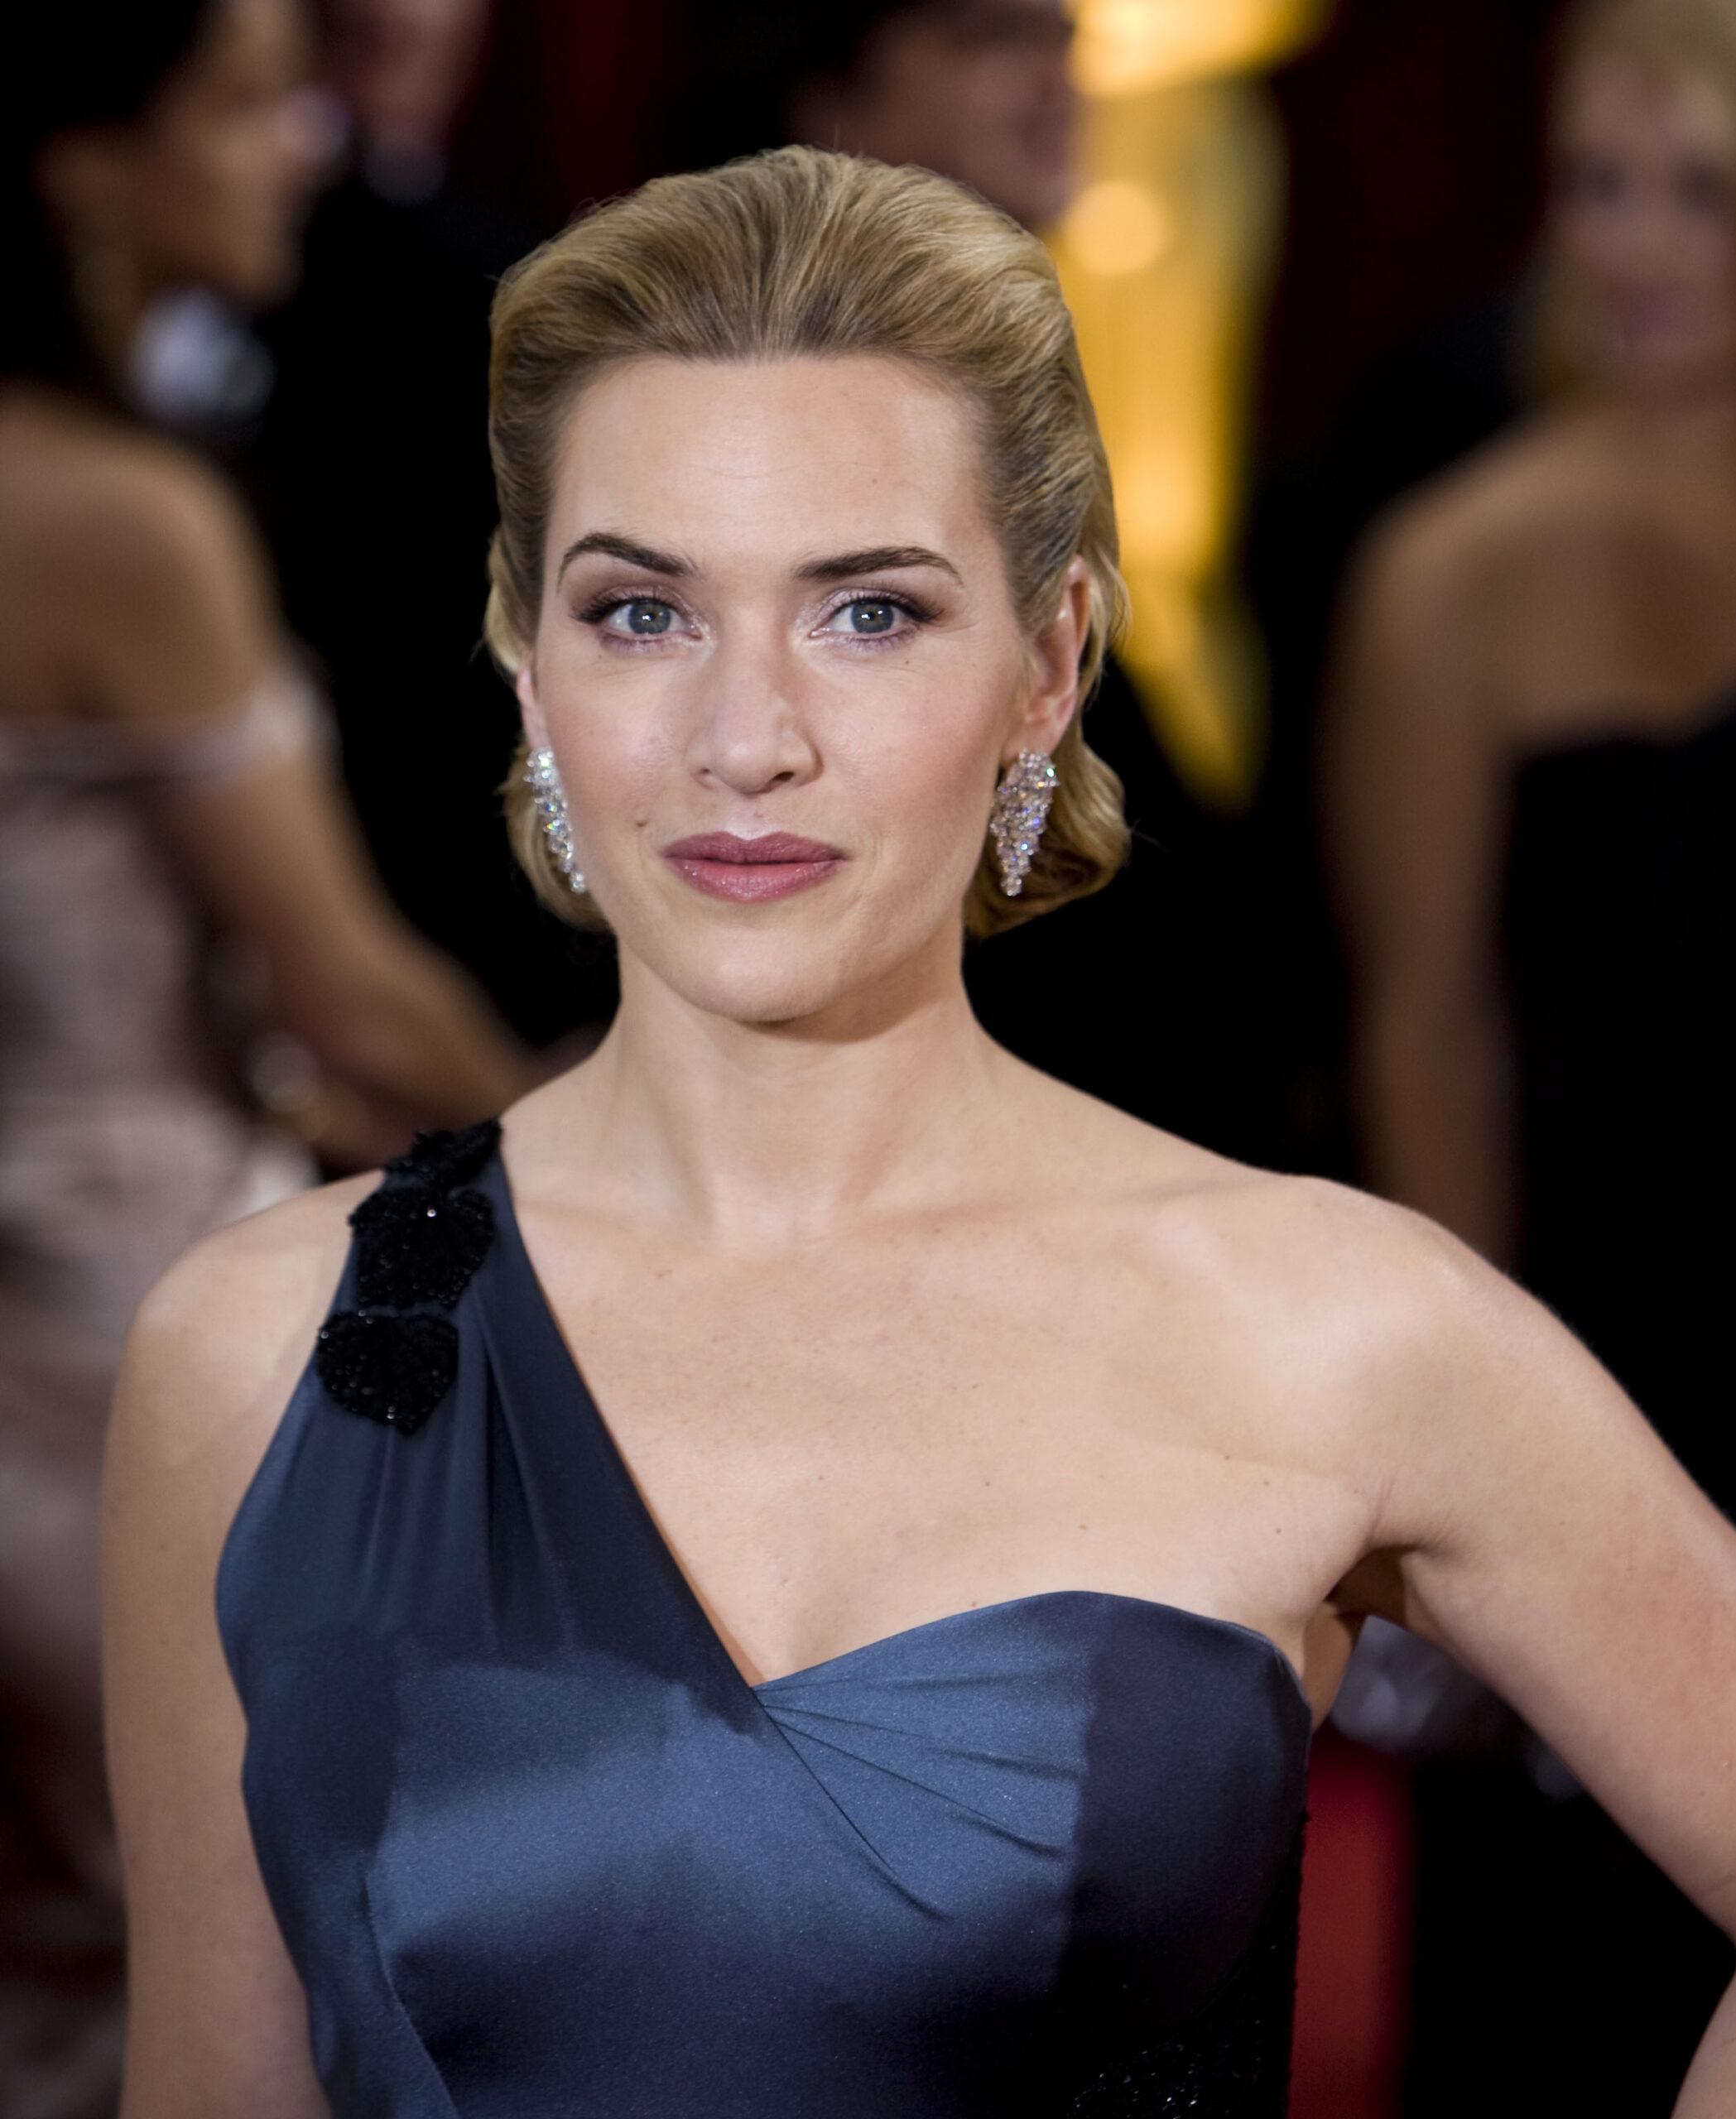 Kate Winslet attending the 81st Academy Awards